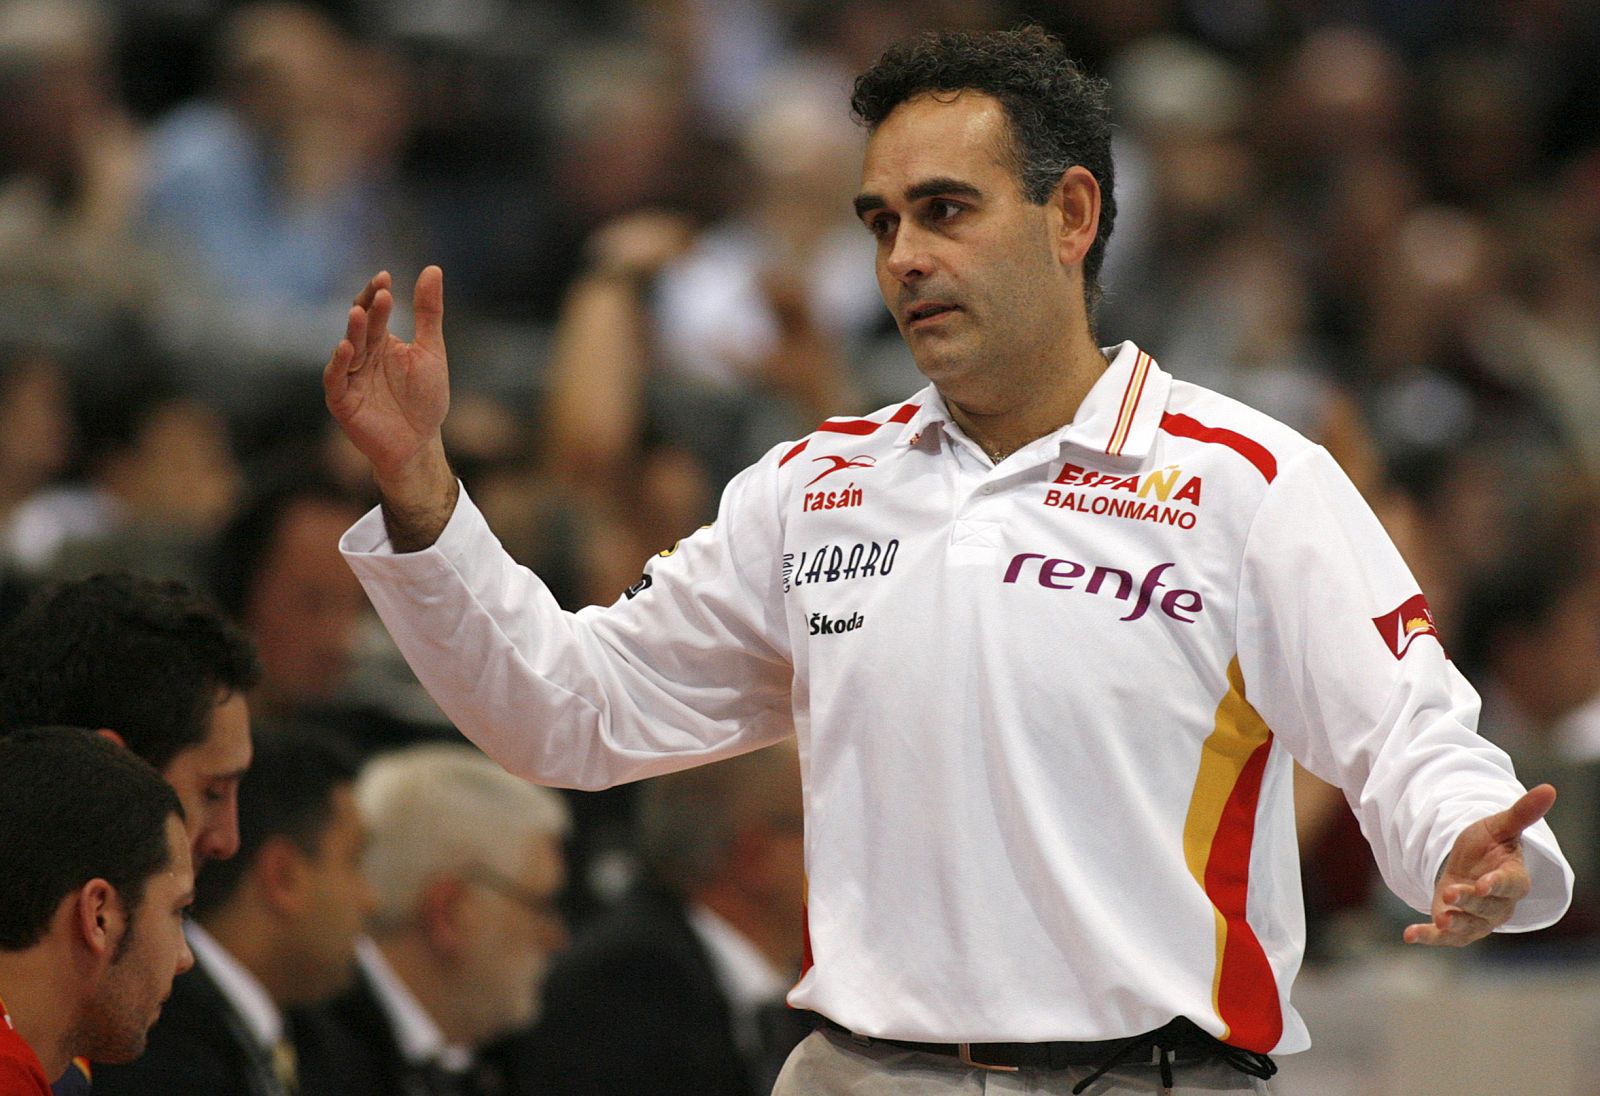 Spain's coach Pastor reacts during the Handball World Cup quarter-final match against Germany in Cologne